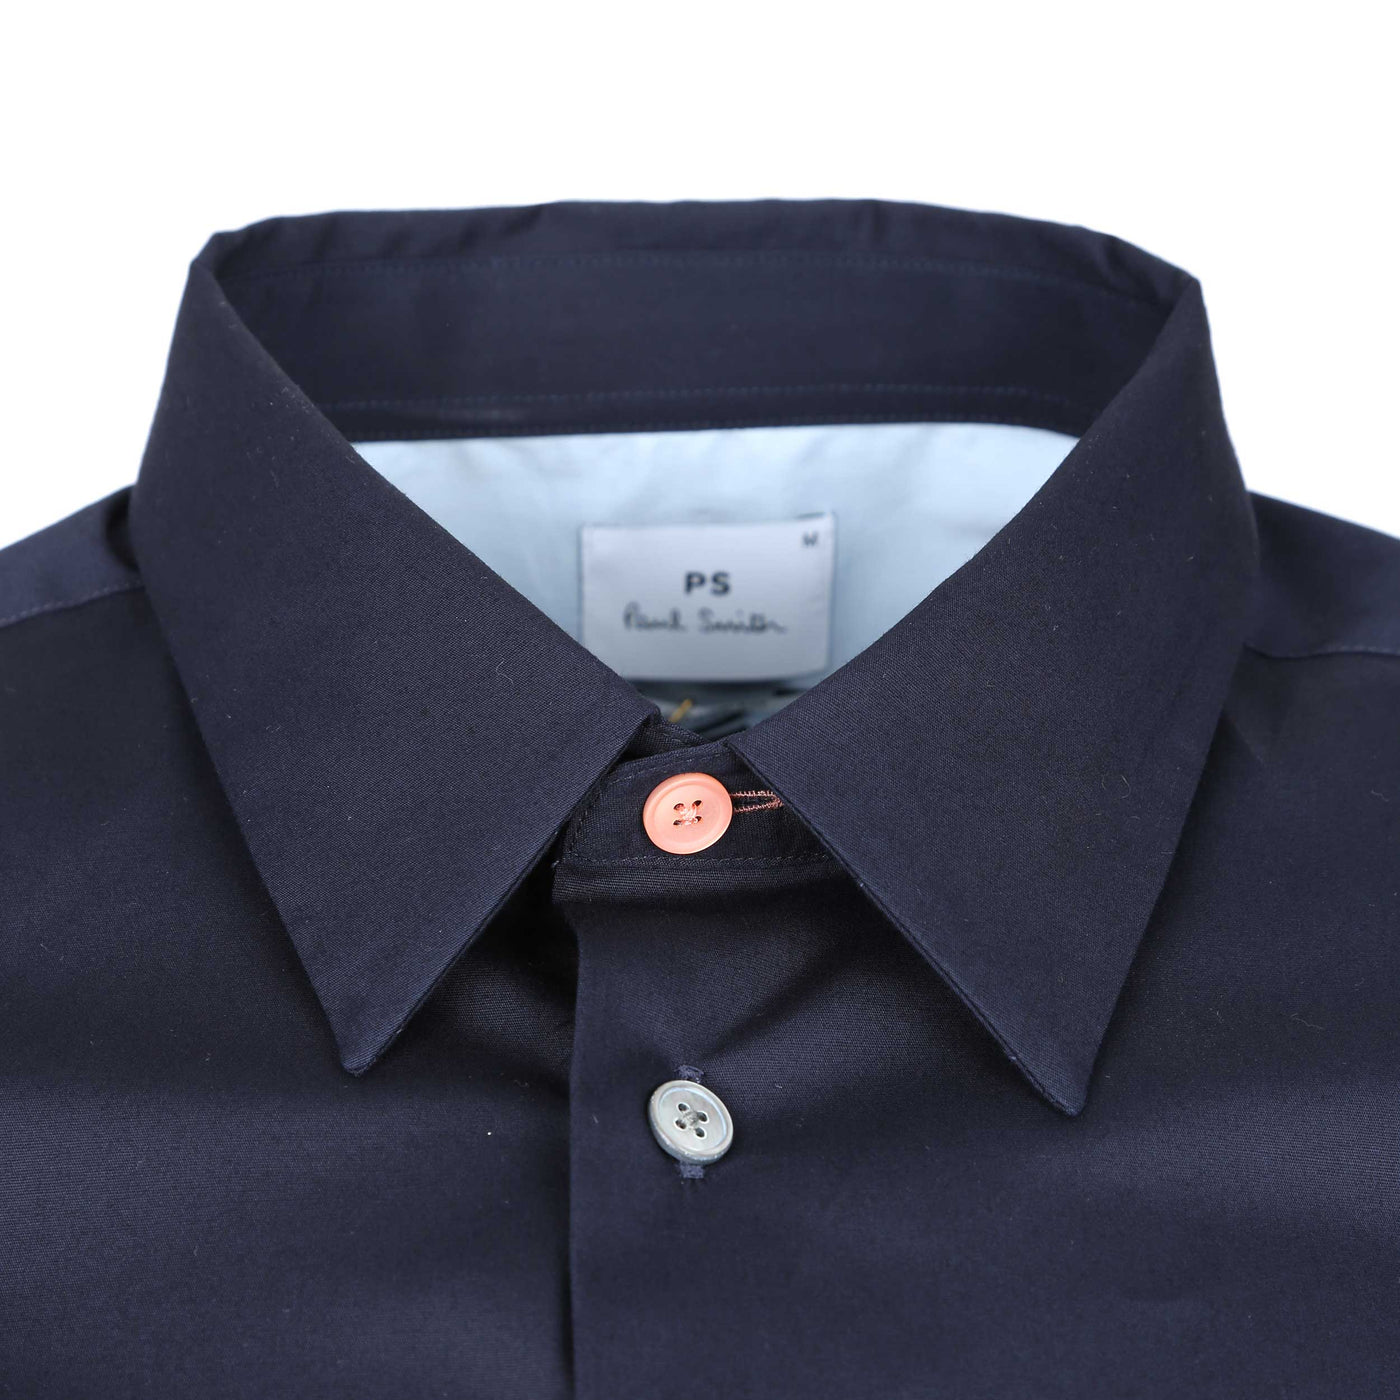 Paul Smith Tailored Fit Shirt in Navy Collar